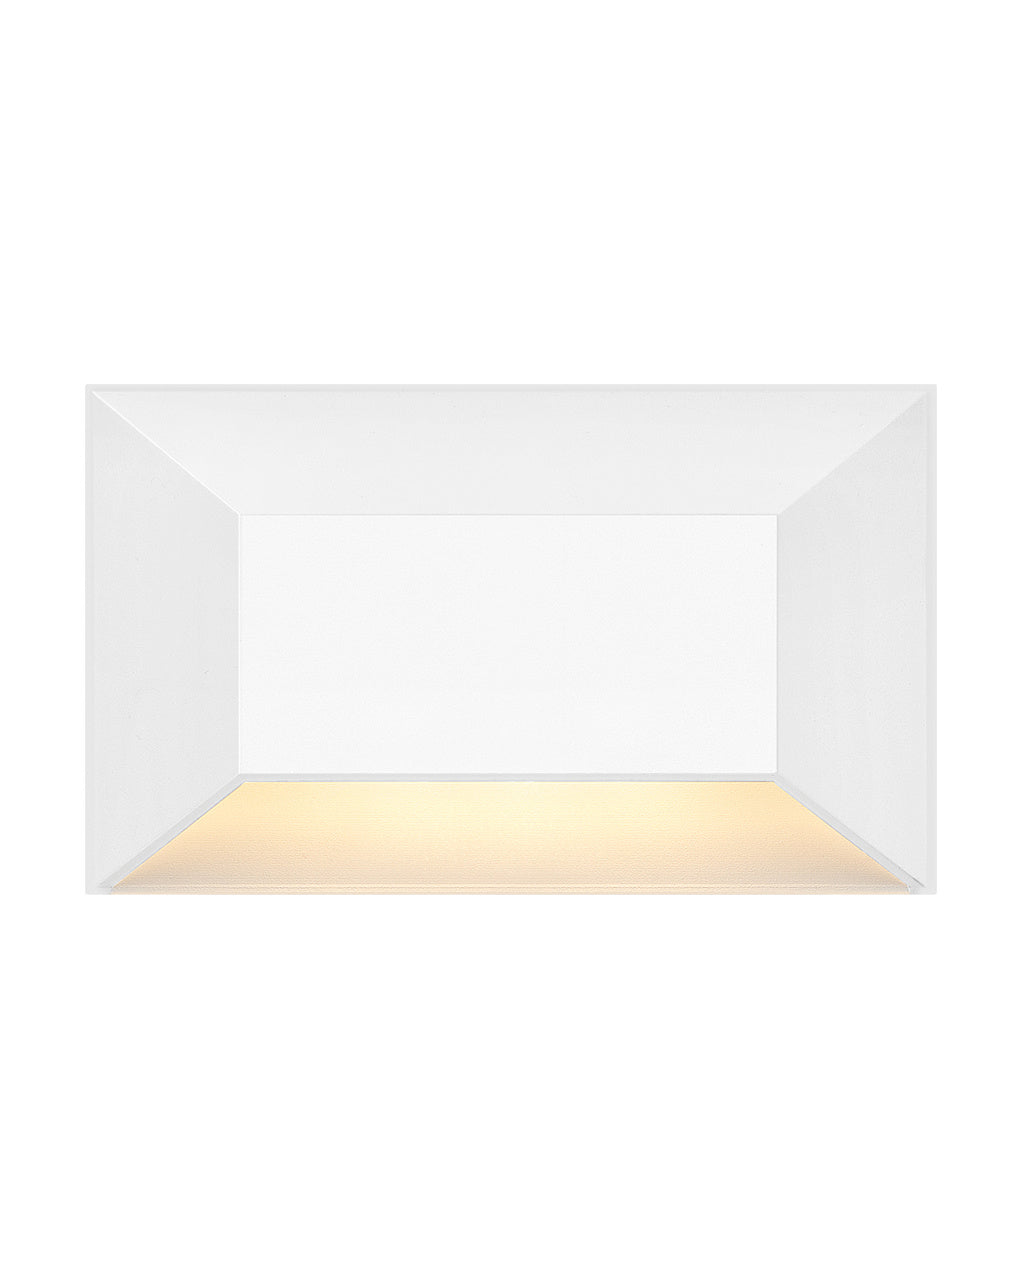 Hinkley - 15225MW - LED Wall Sconce - Nuvi - Matte White